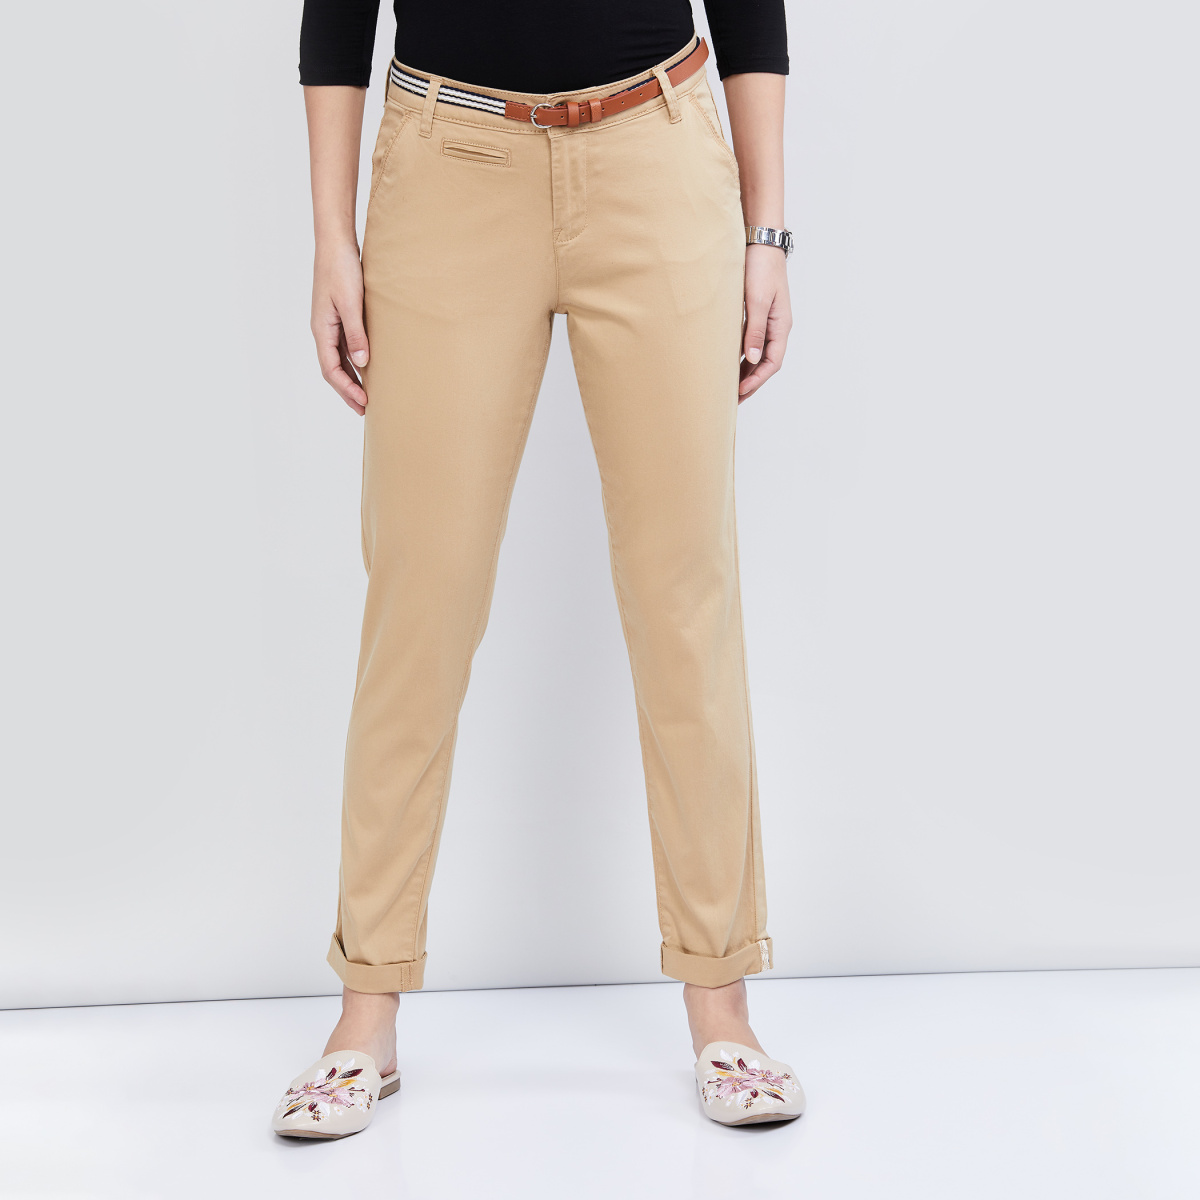 Buy LIME Trousers  Pants for Women by MAX Online  Ajiocom